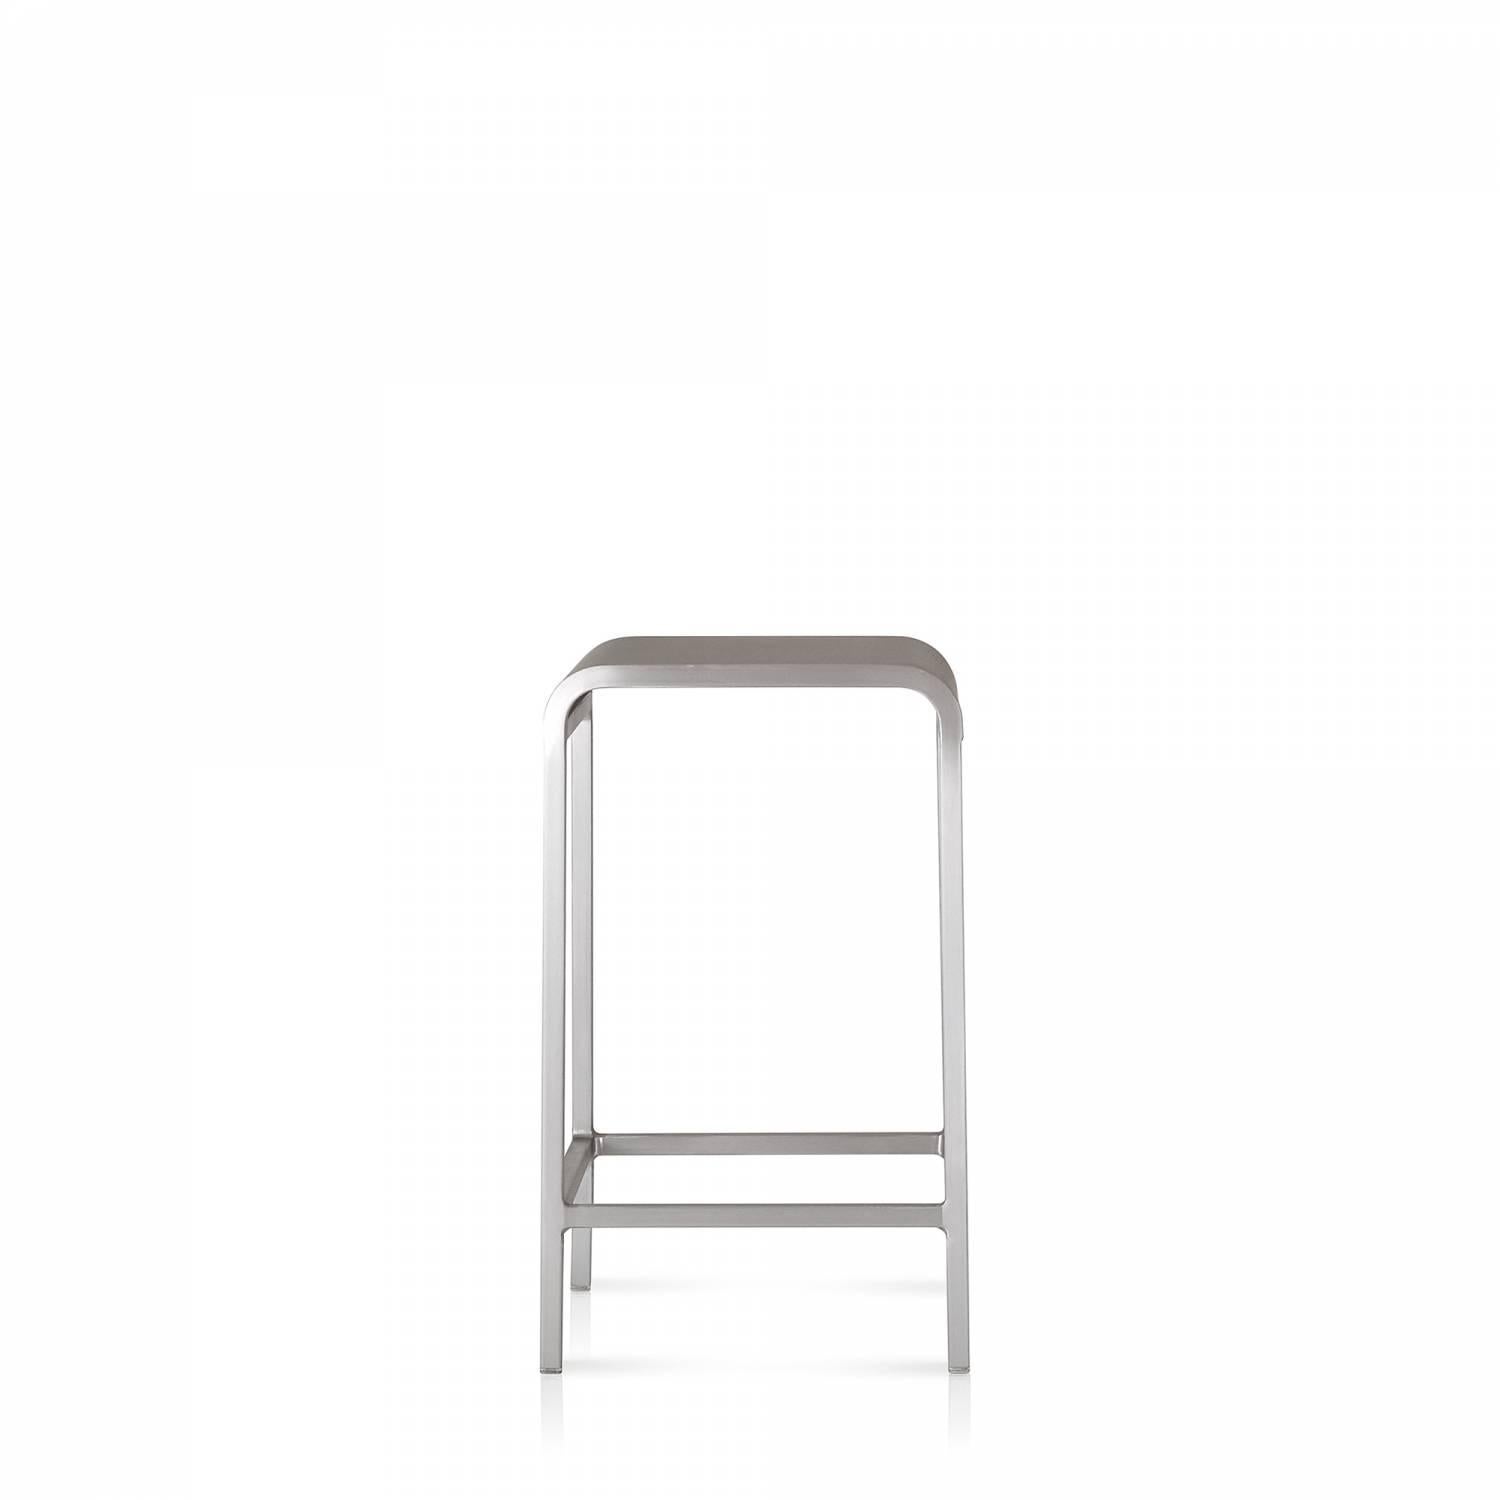 Emeco’s collaboration with Norman Foster resulted in the “20-06” chair. Foster envisioned a “neutral” chair - visually and physically lightweight. But the 20-06 is also super strong-tested to 445Kg. Lord Norman Foster said ”I appreciate the